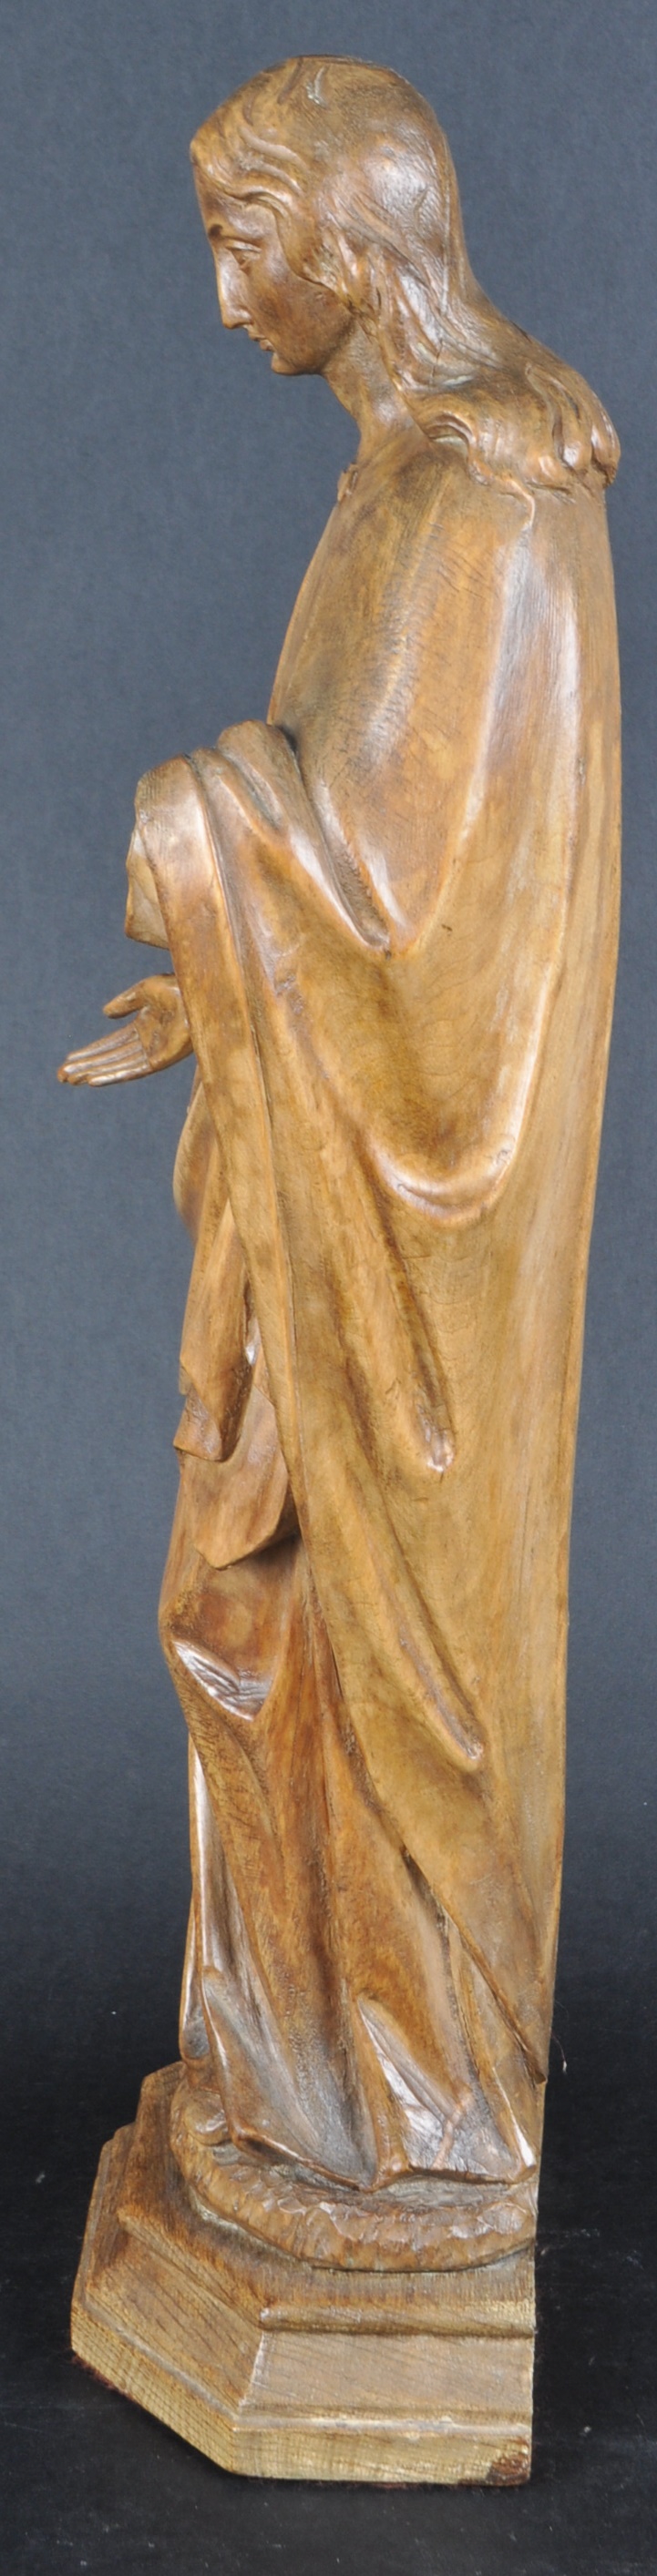 LARGE WALNUT CARVING OF THE VIRGIN MARY - Image 5 of 7